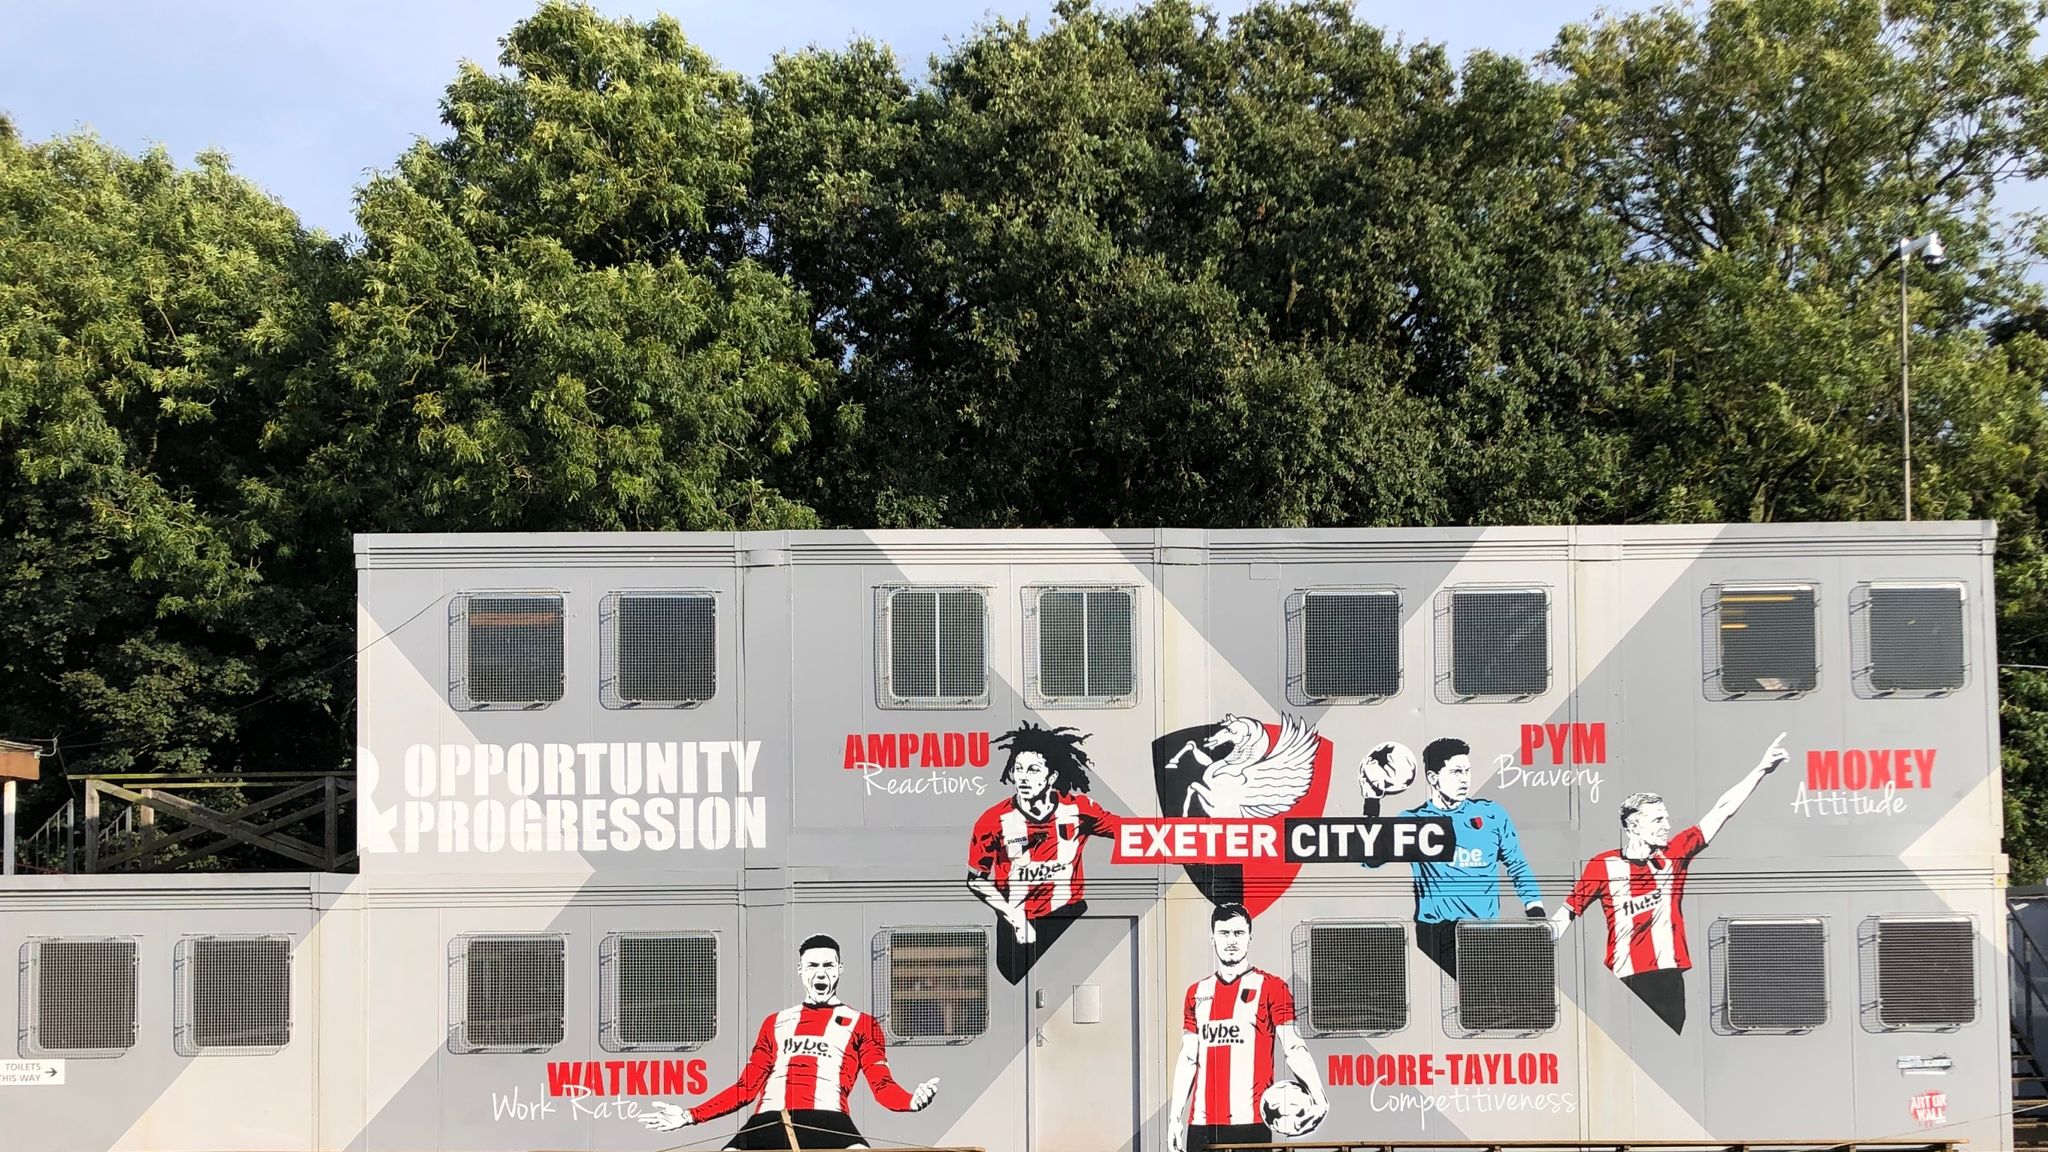 Inside Exeter City S Academy The Small Club Developing Big Talent Football News Sky Sports